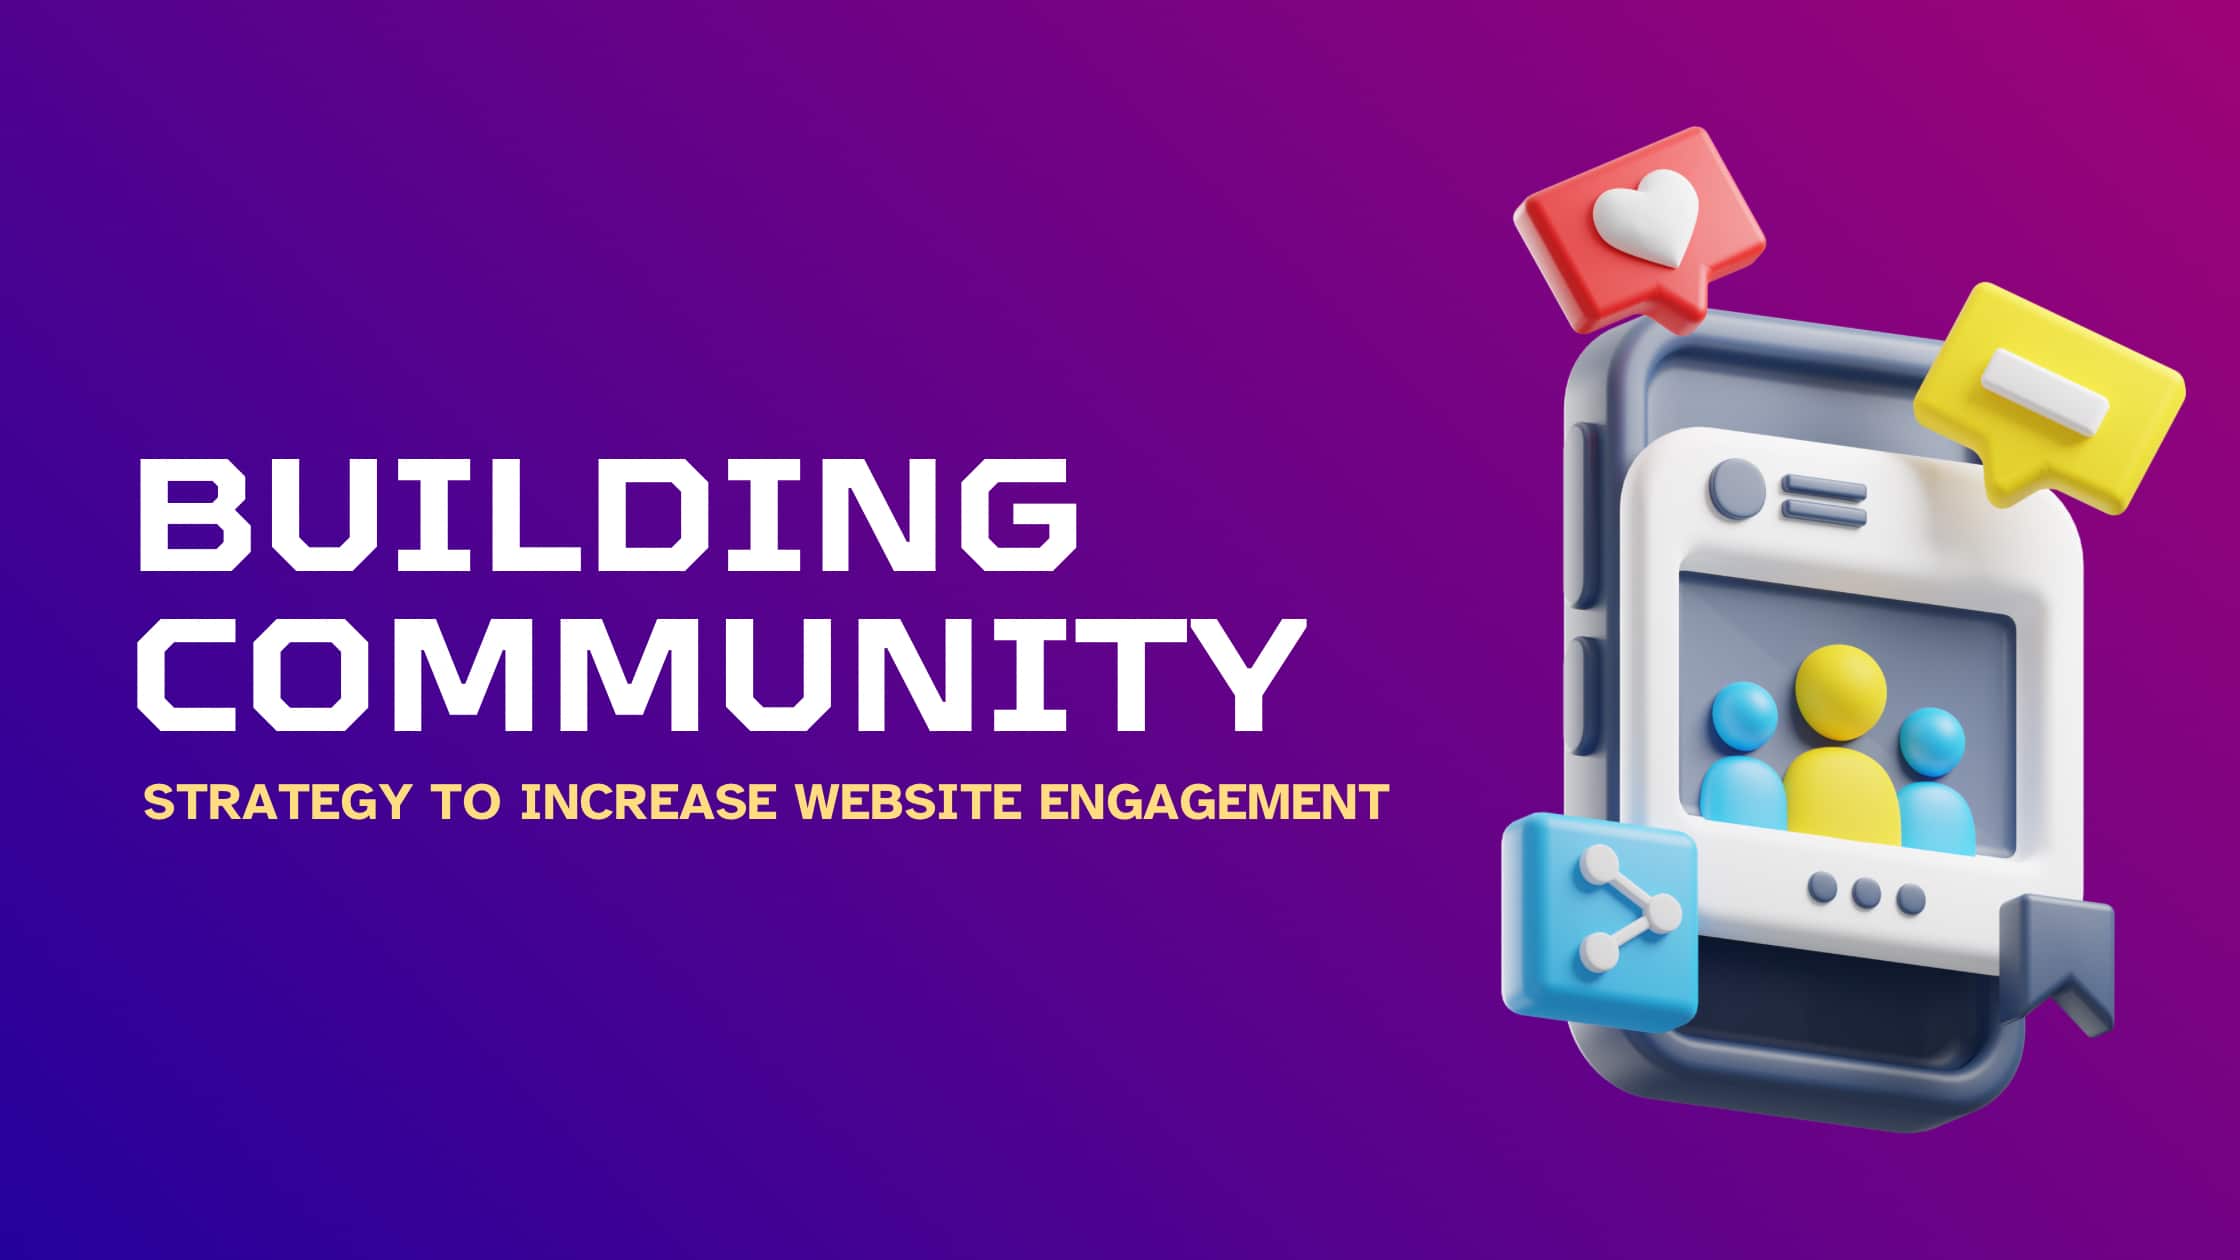 Building Community: A Strategy To Increase Website Engagement